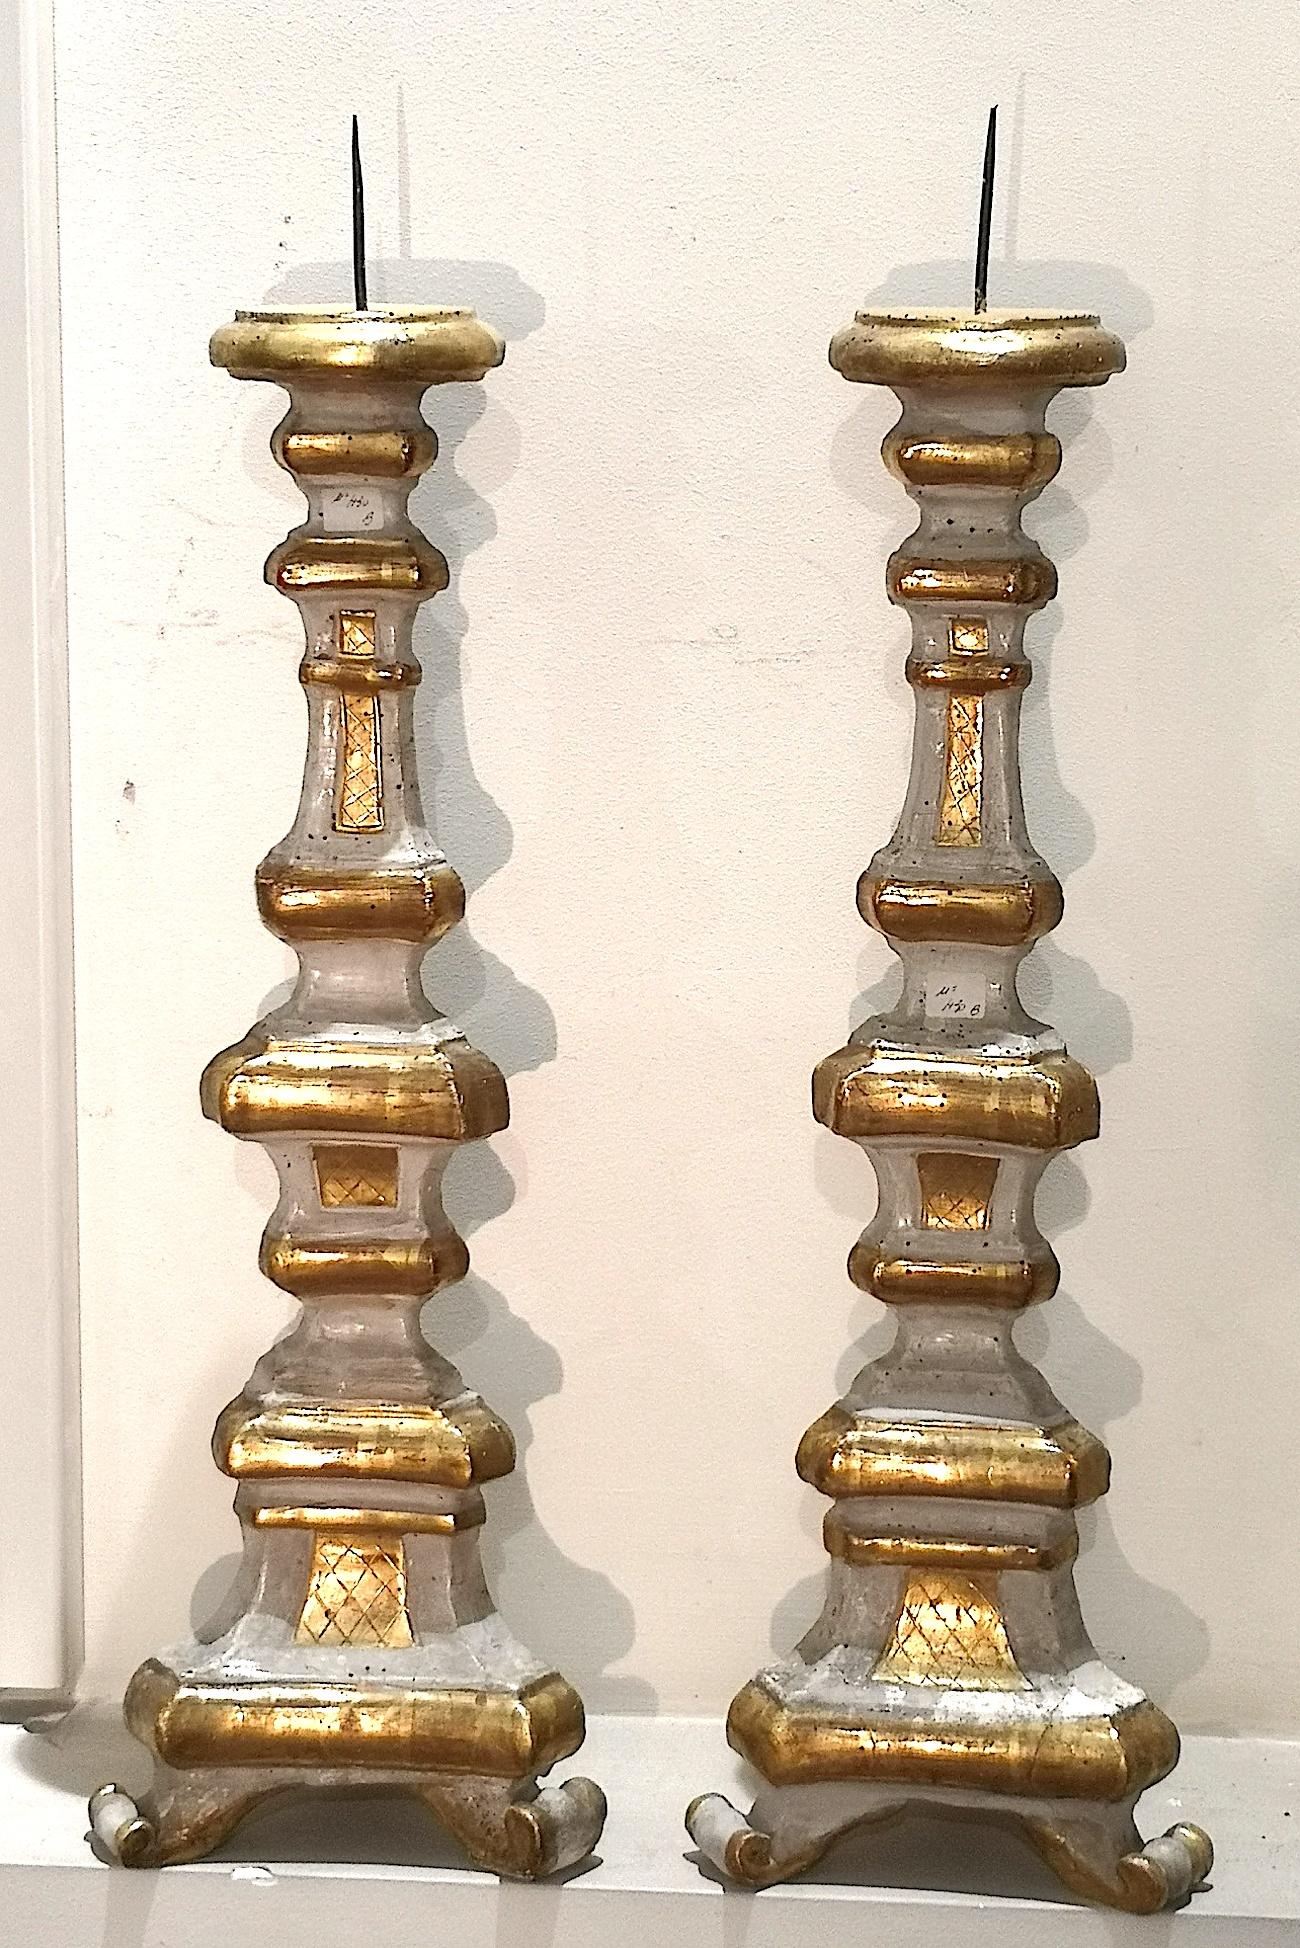 A wonderful pair of small Venetian parcel gilt and paired torchères or candle holders from the middle to the end of the 18th century. Each torchère measures 26 inches high. The base is 8.5 inches wide and 7.5 inches deep. The use of these objects